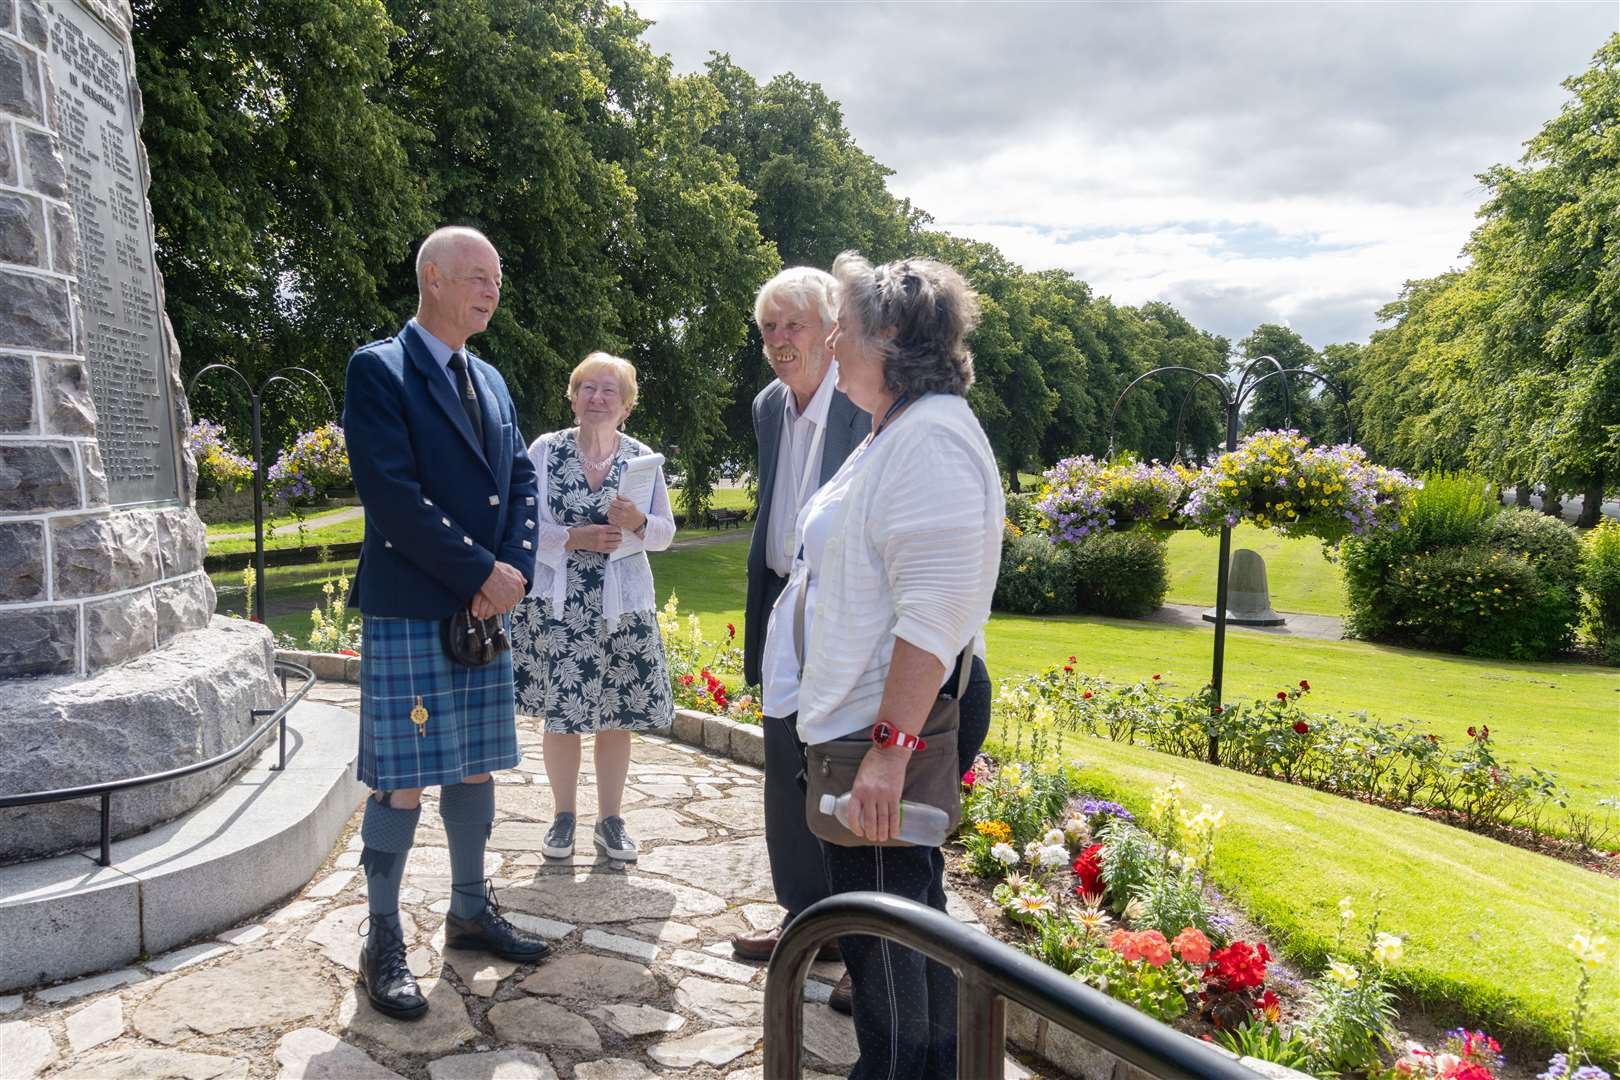 Barry Ashby and Sandra Maclennan of Forres In Bloom with the Keep Scotland Beautiful judges at Forres War Memorial.